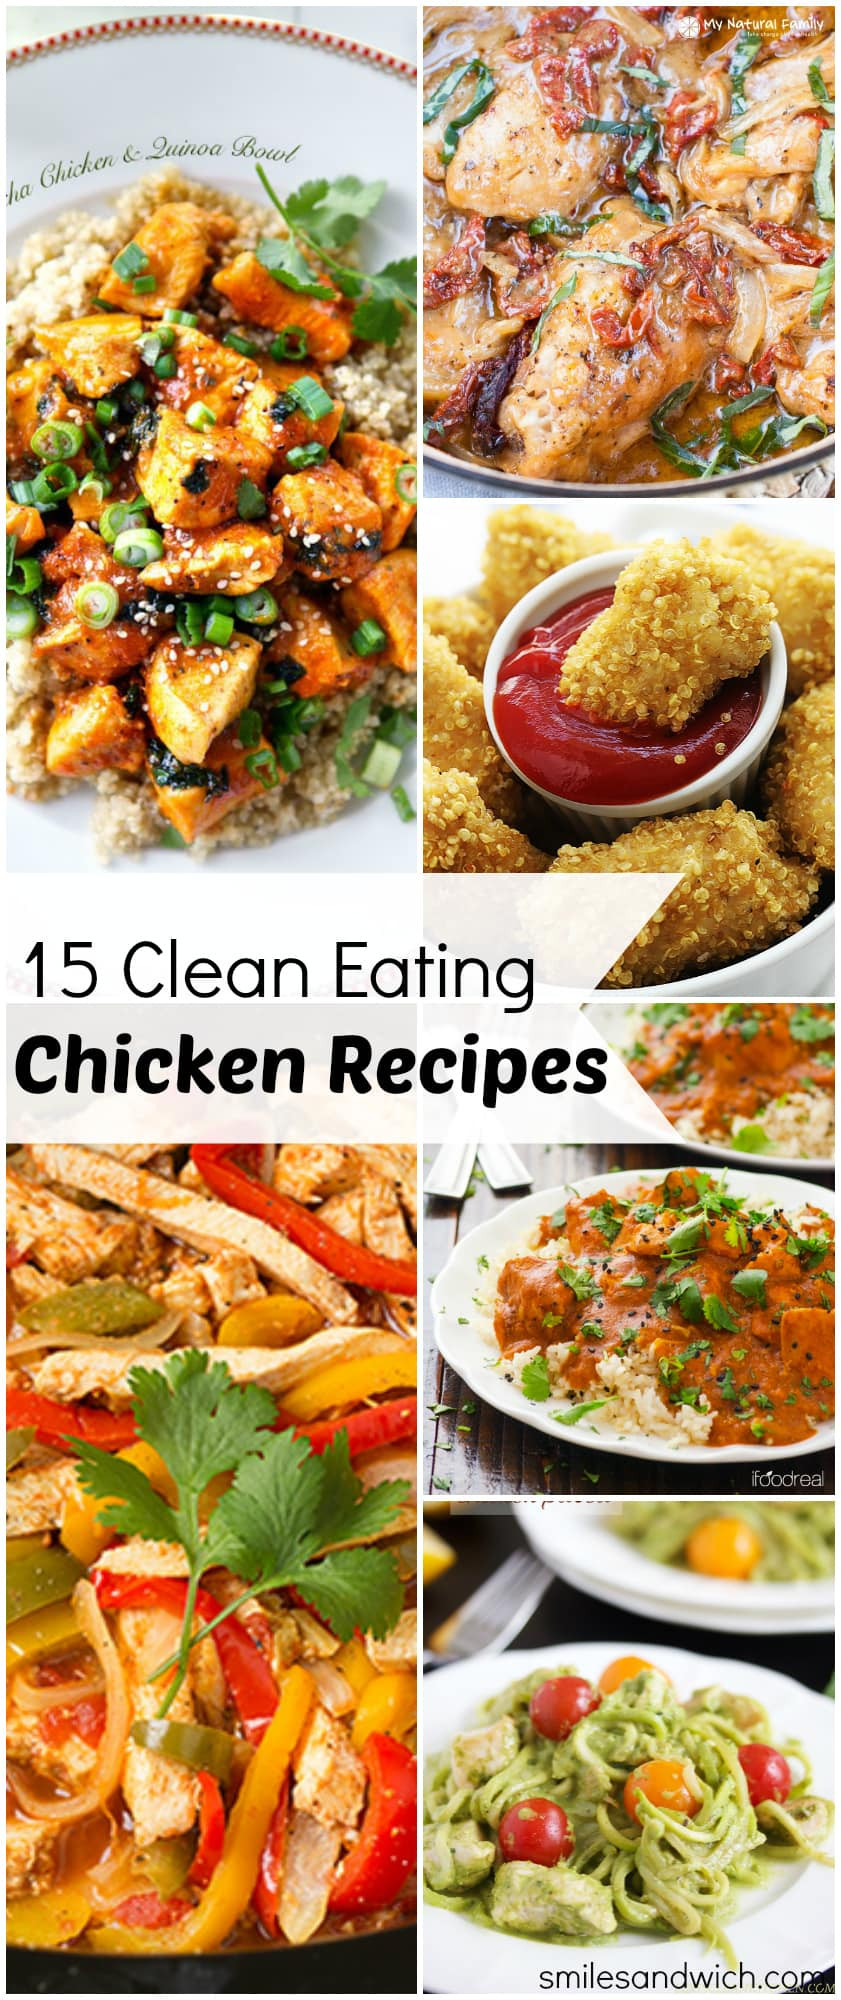 Clean Eating Recipes Chicken
 15 Clean Eating Chicken Recipes Smile Sandwich